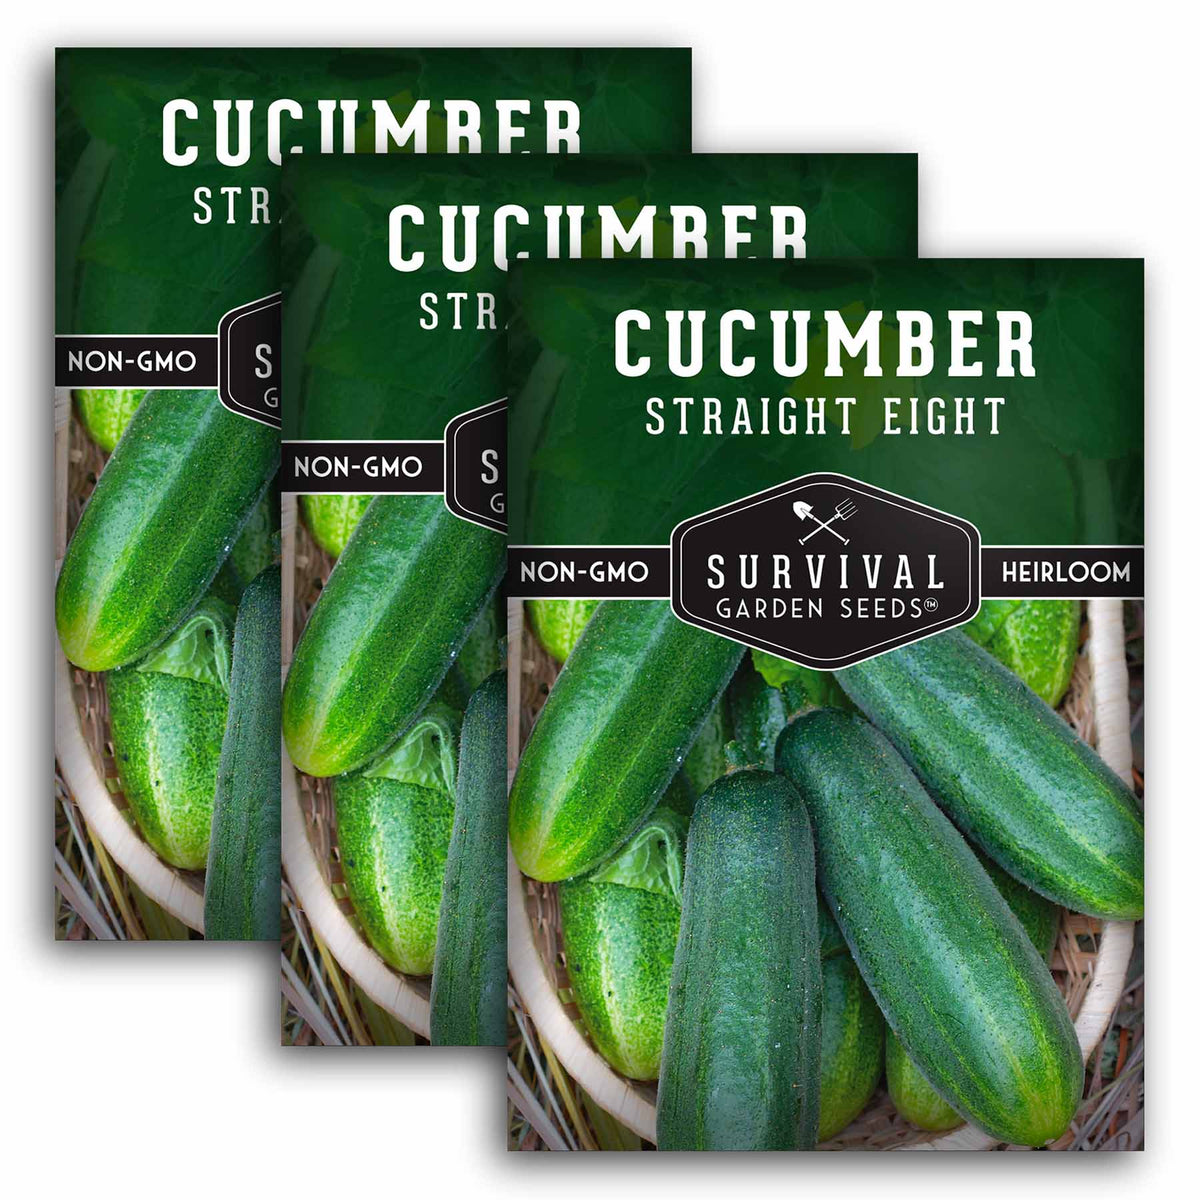 3 packets of Straight Eight Cucumber seeds